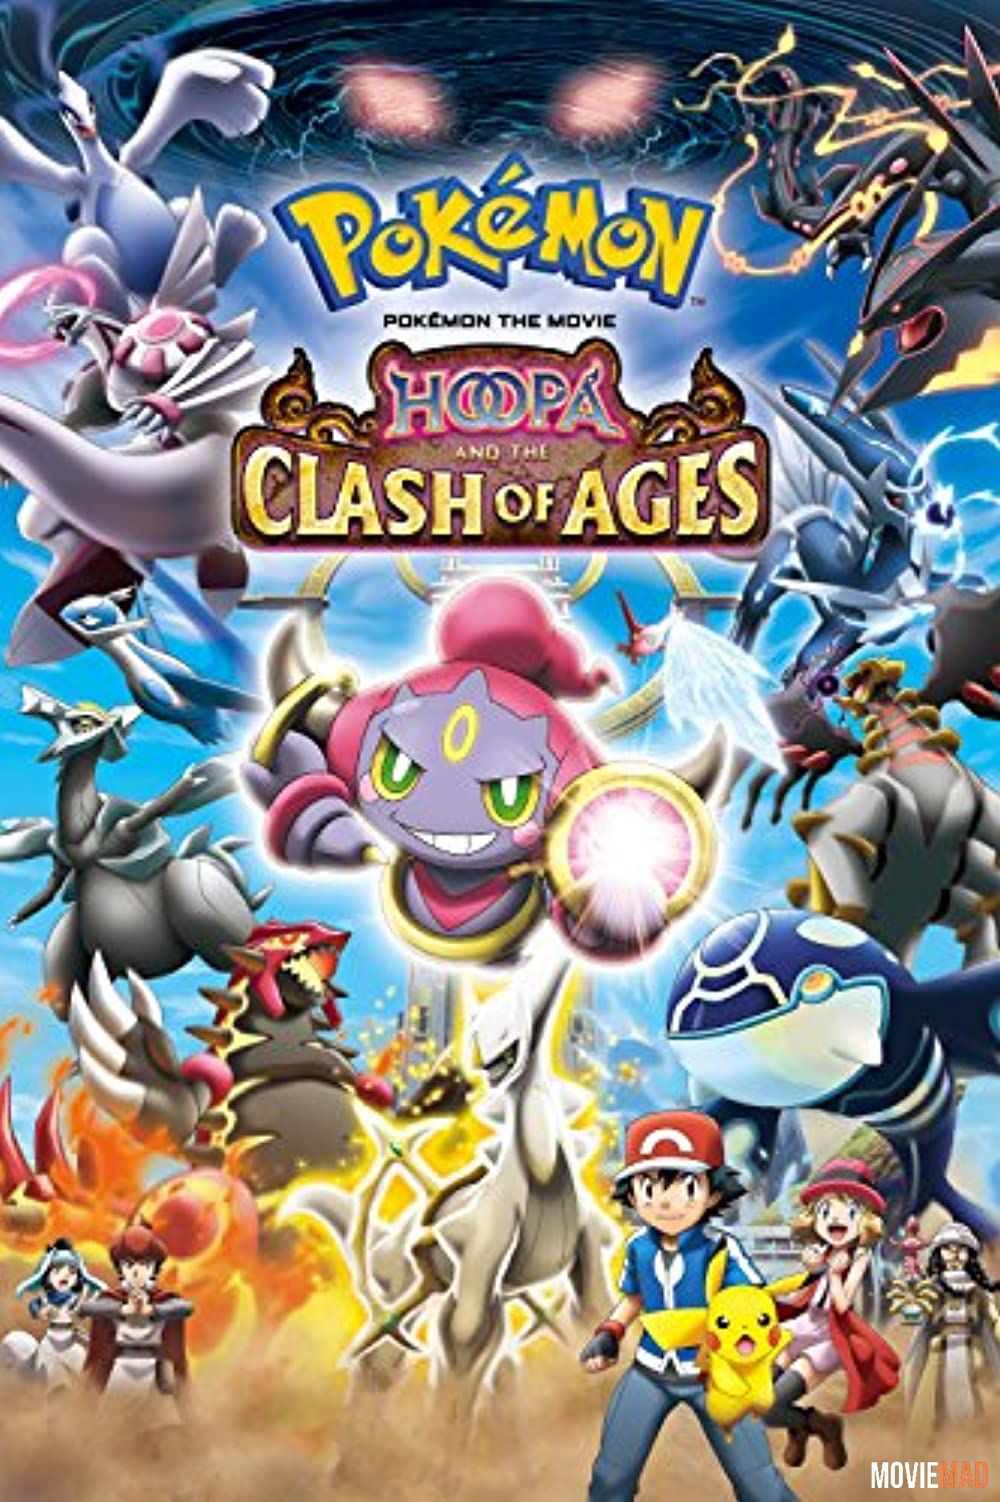 Pokemon the Movie Hoopa and the Clash of Ages (2015) Hindi Dubbed HDRip Full Movie 720p 480p